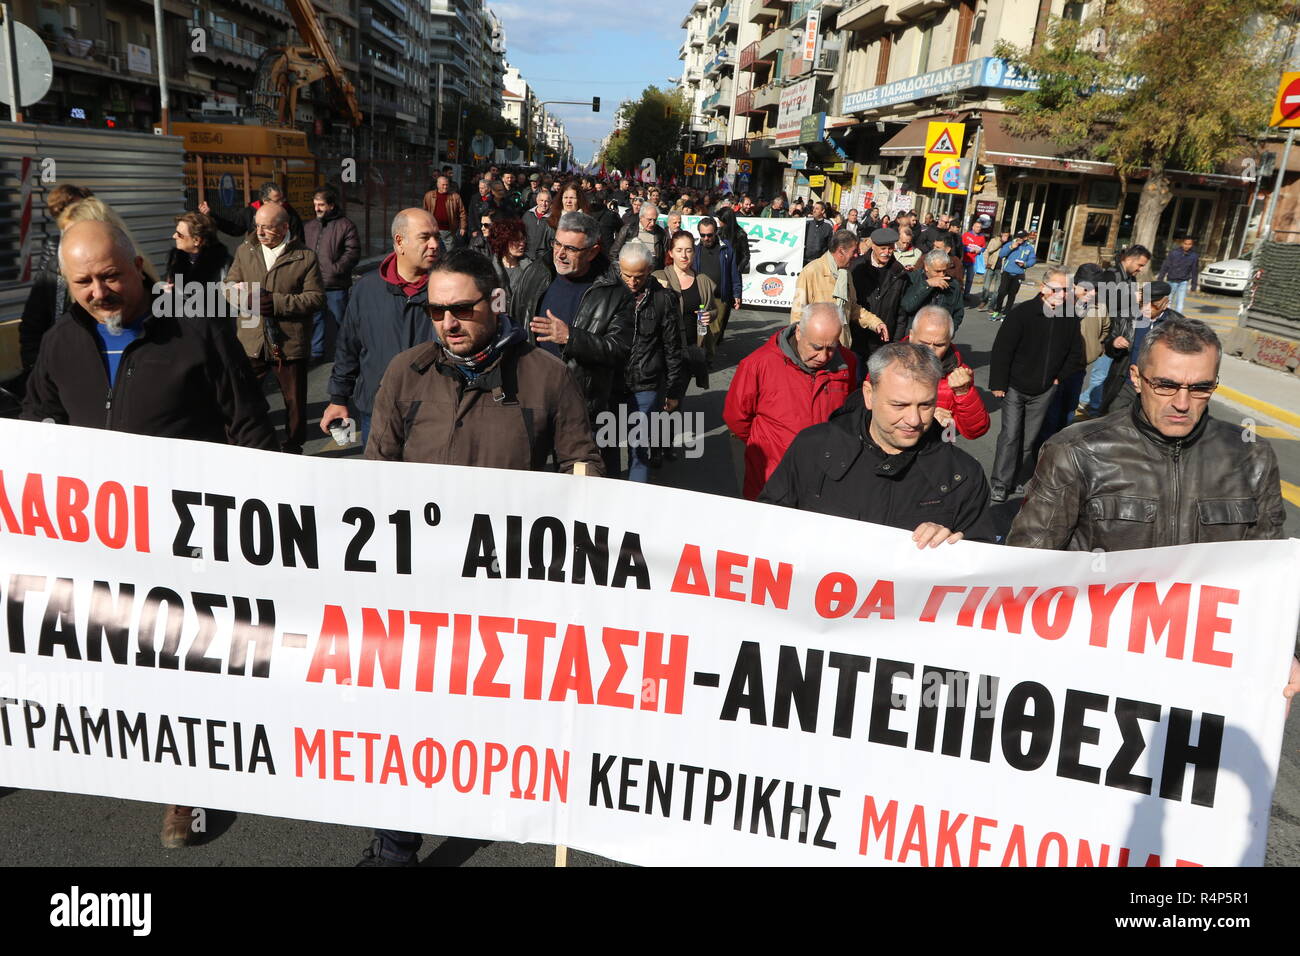 Thessaloniki, Greece, 28th November, 2018.  Protesters from the PAME trade union take part in a demonstration during a 24-hour walkout staged by Greece's largest private sector union GSEE  against planned pension cuts and to demand the reversal of labour reforms implemented under the country's third bailout. The strike by the GSEE union is the second major strike since Greece exited its bailout programme in August. Credit : Orhan Tsolak / Alamy Live News. Stock Photo